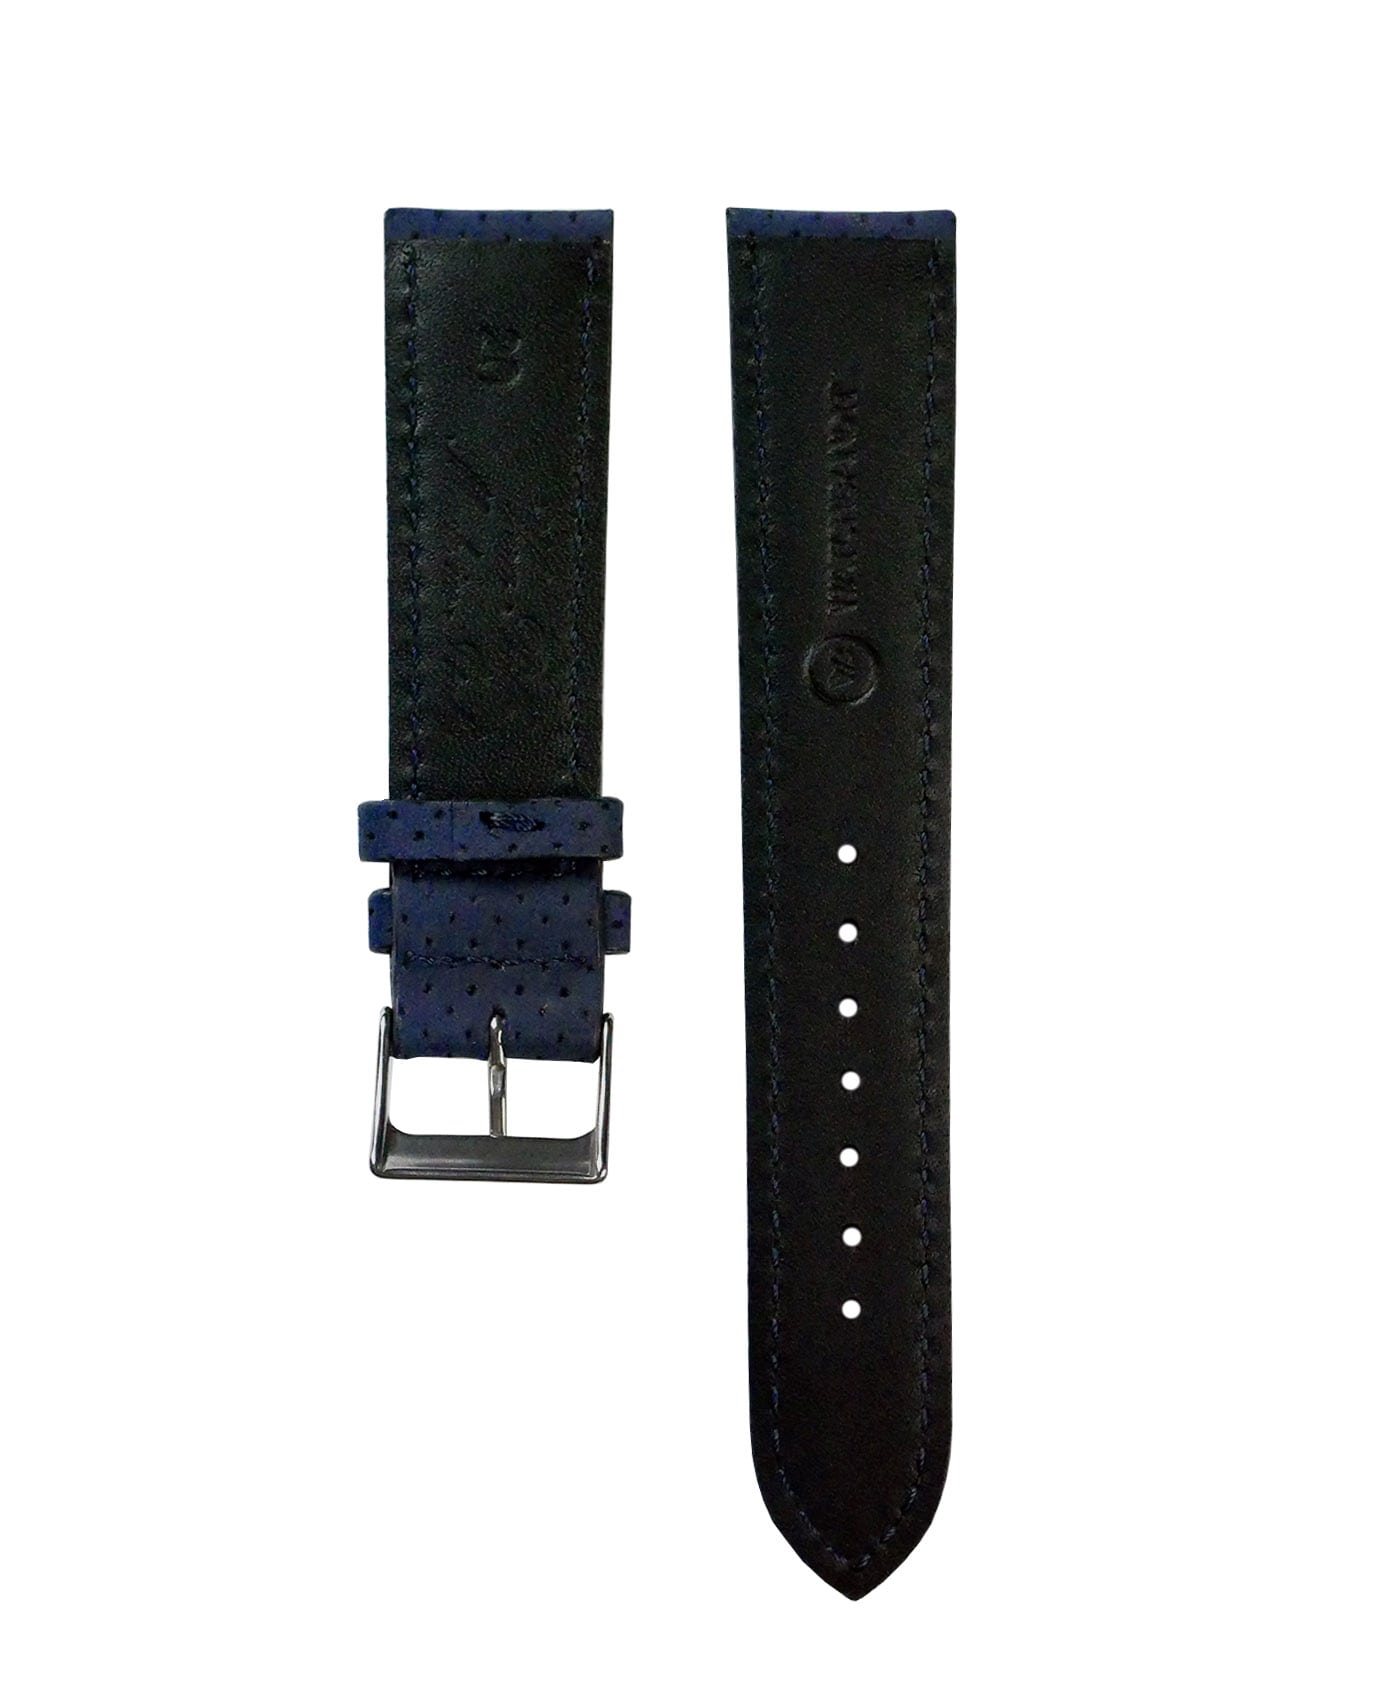 WB-perforated-nubuck-leather-watch-strap-dark-blue-back-min